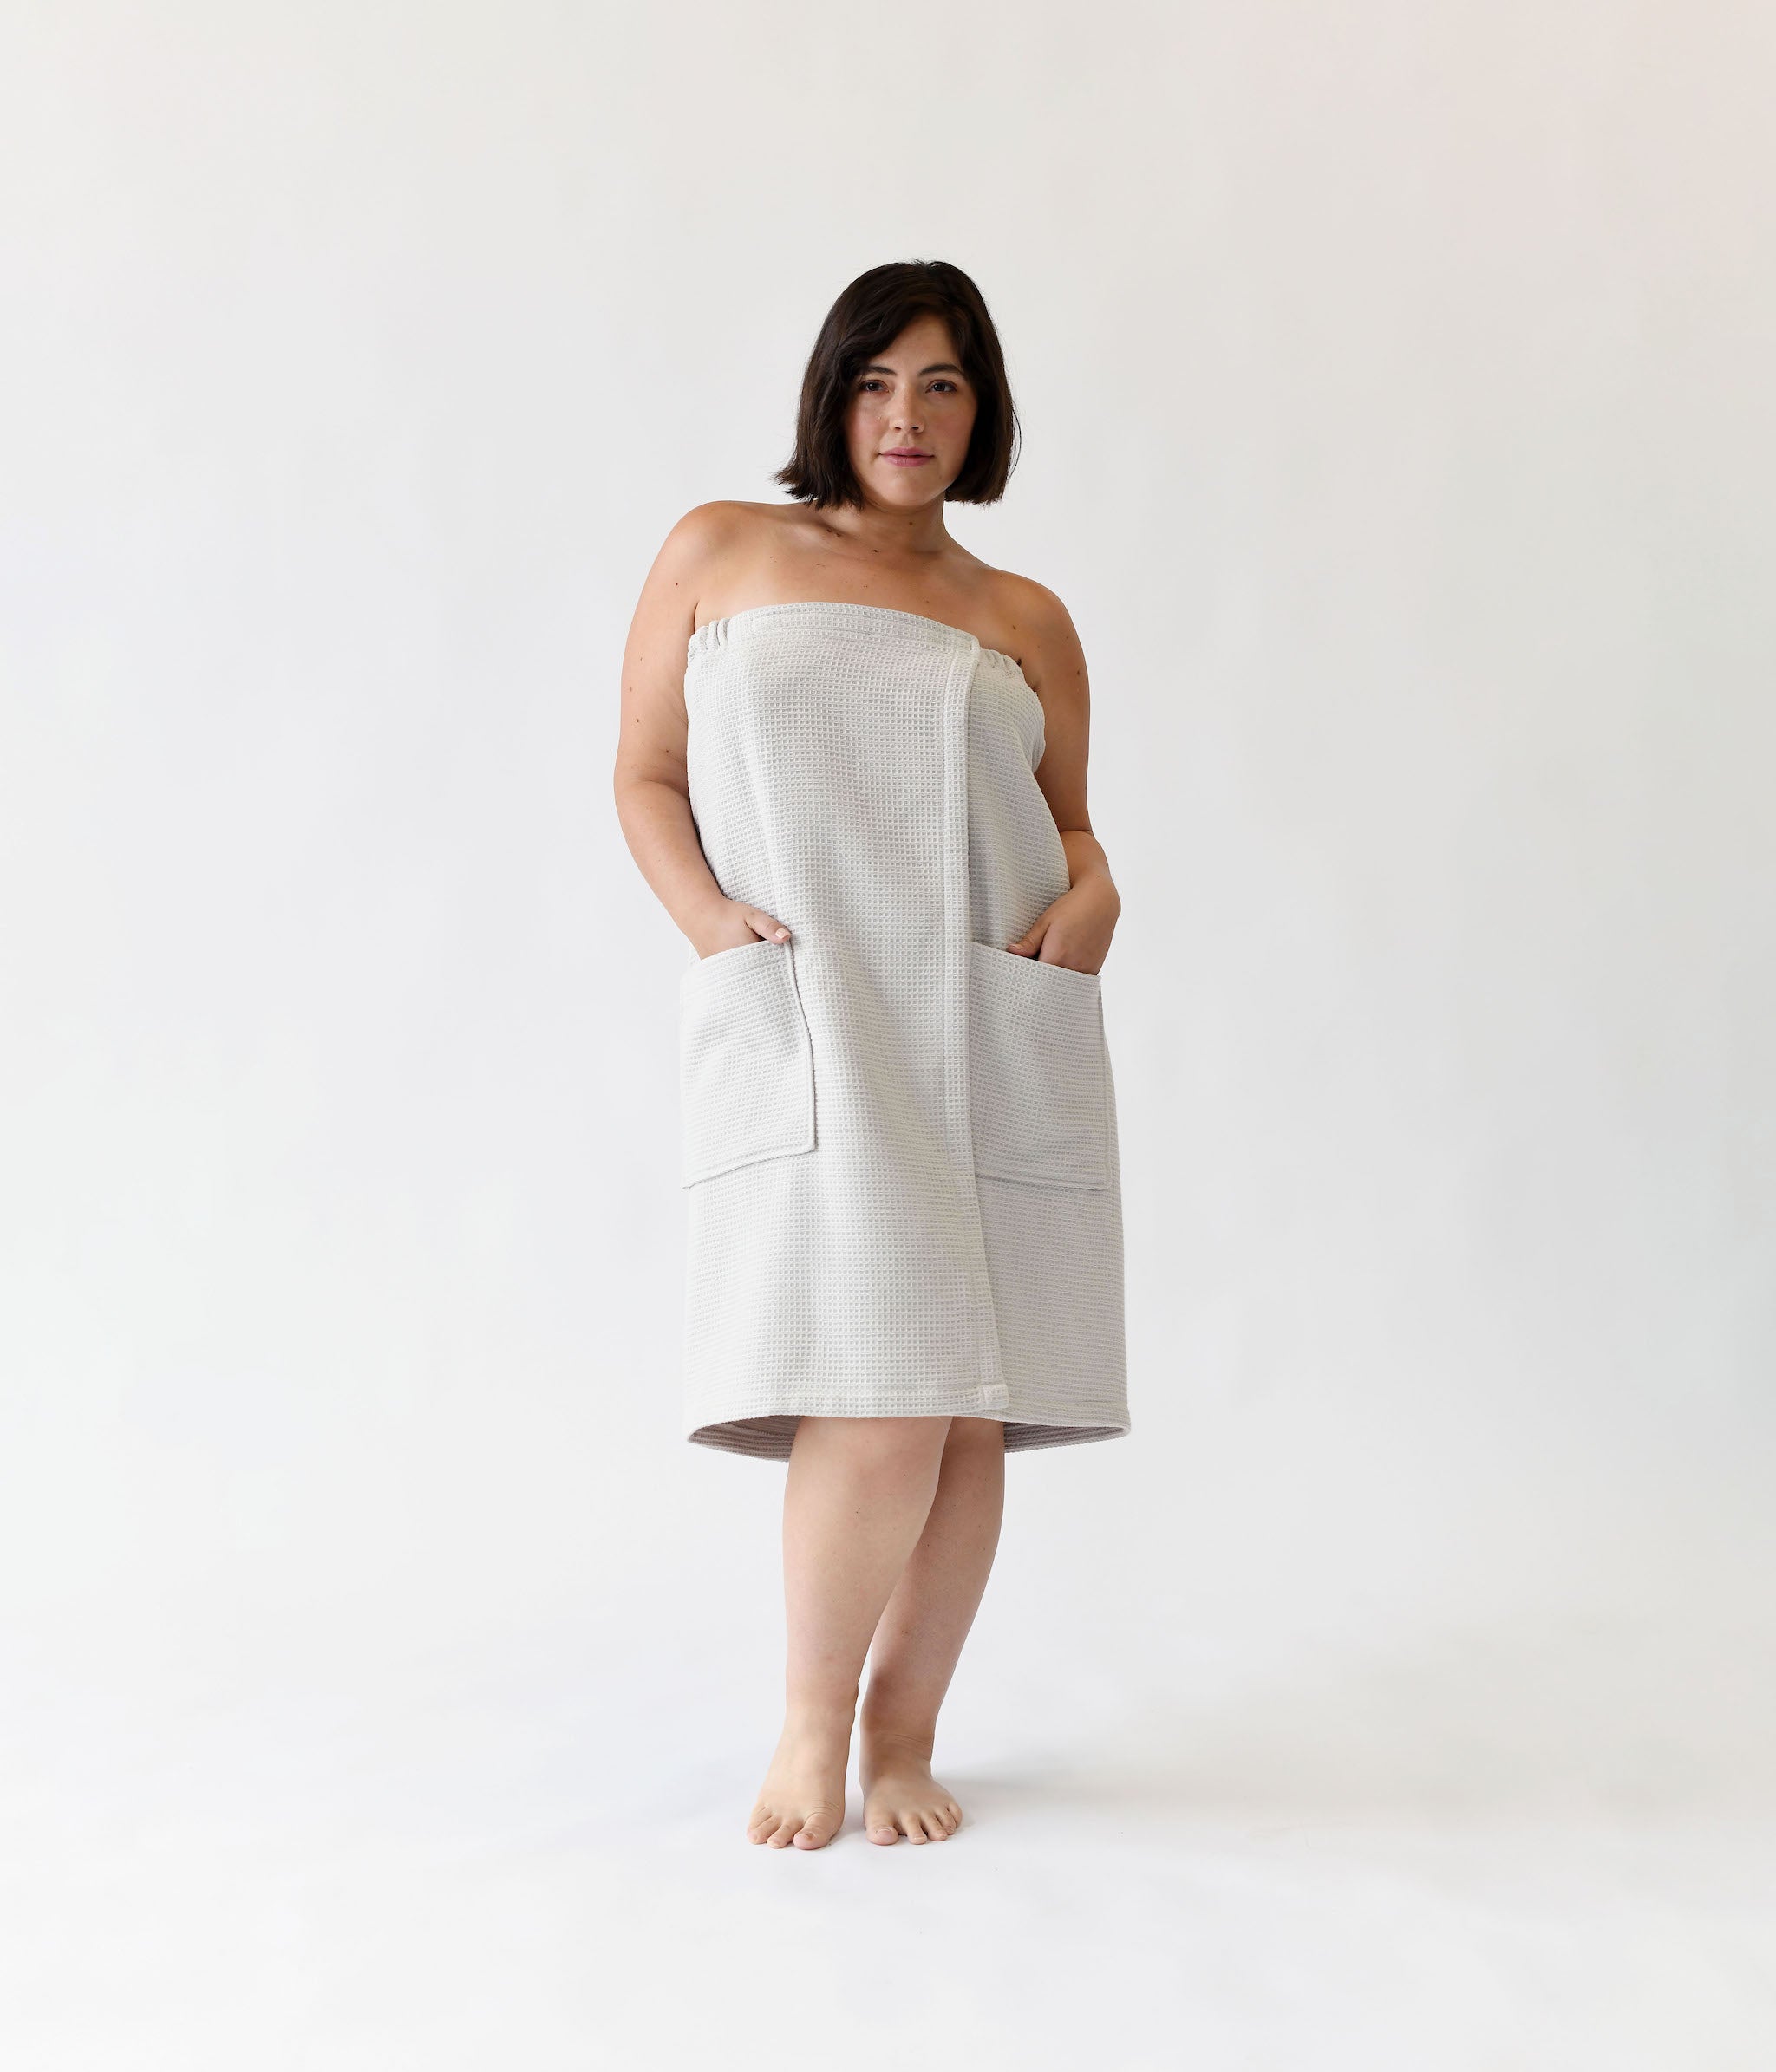 Light Grey Waffle Bath Wrap. The bath wrap is shown being worn by a woman. Photo was taken with a white background.|Color:Light Grey